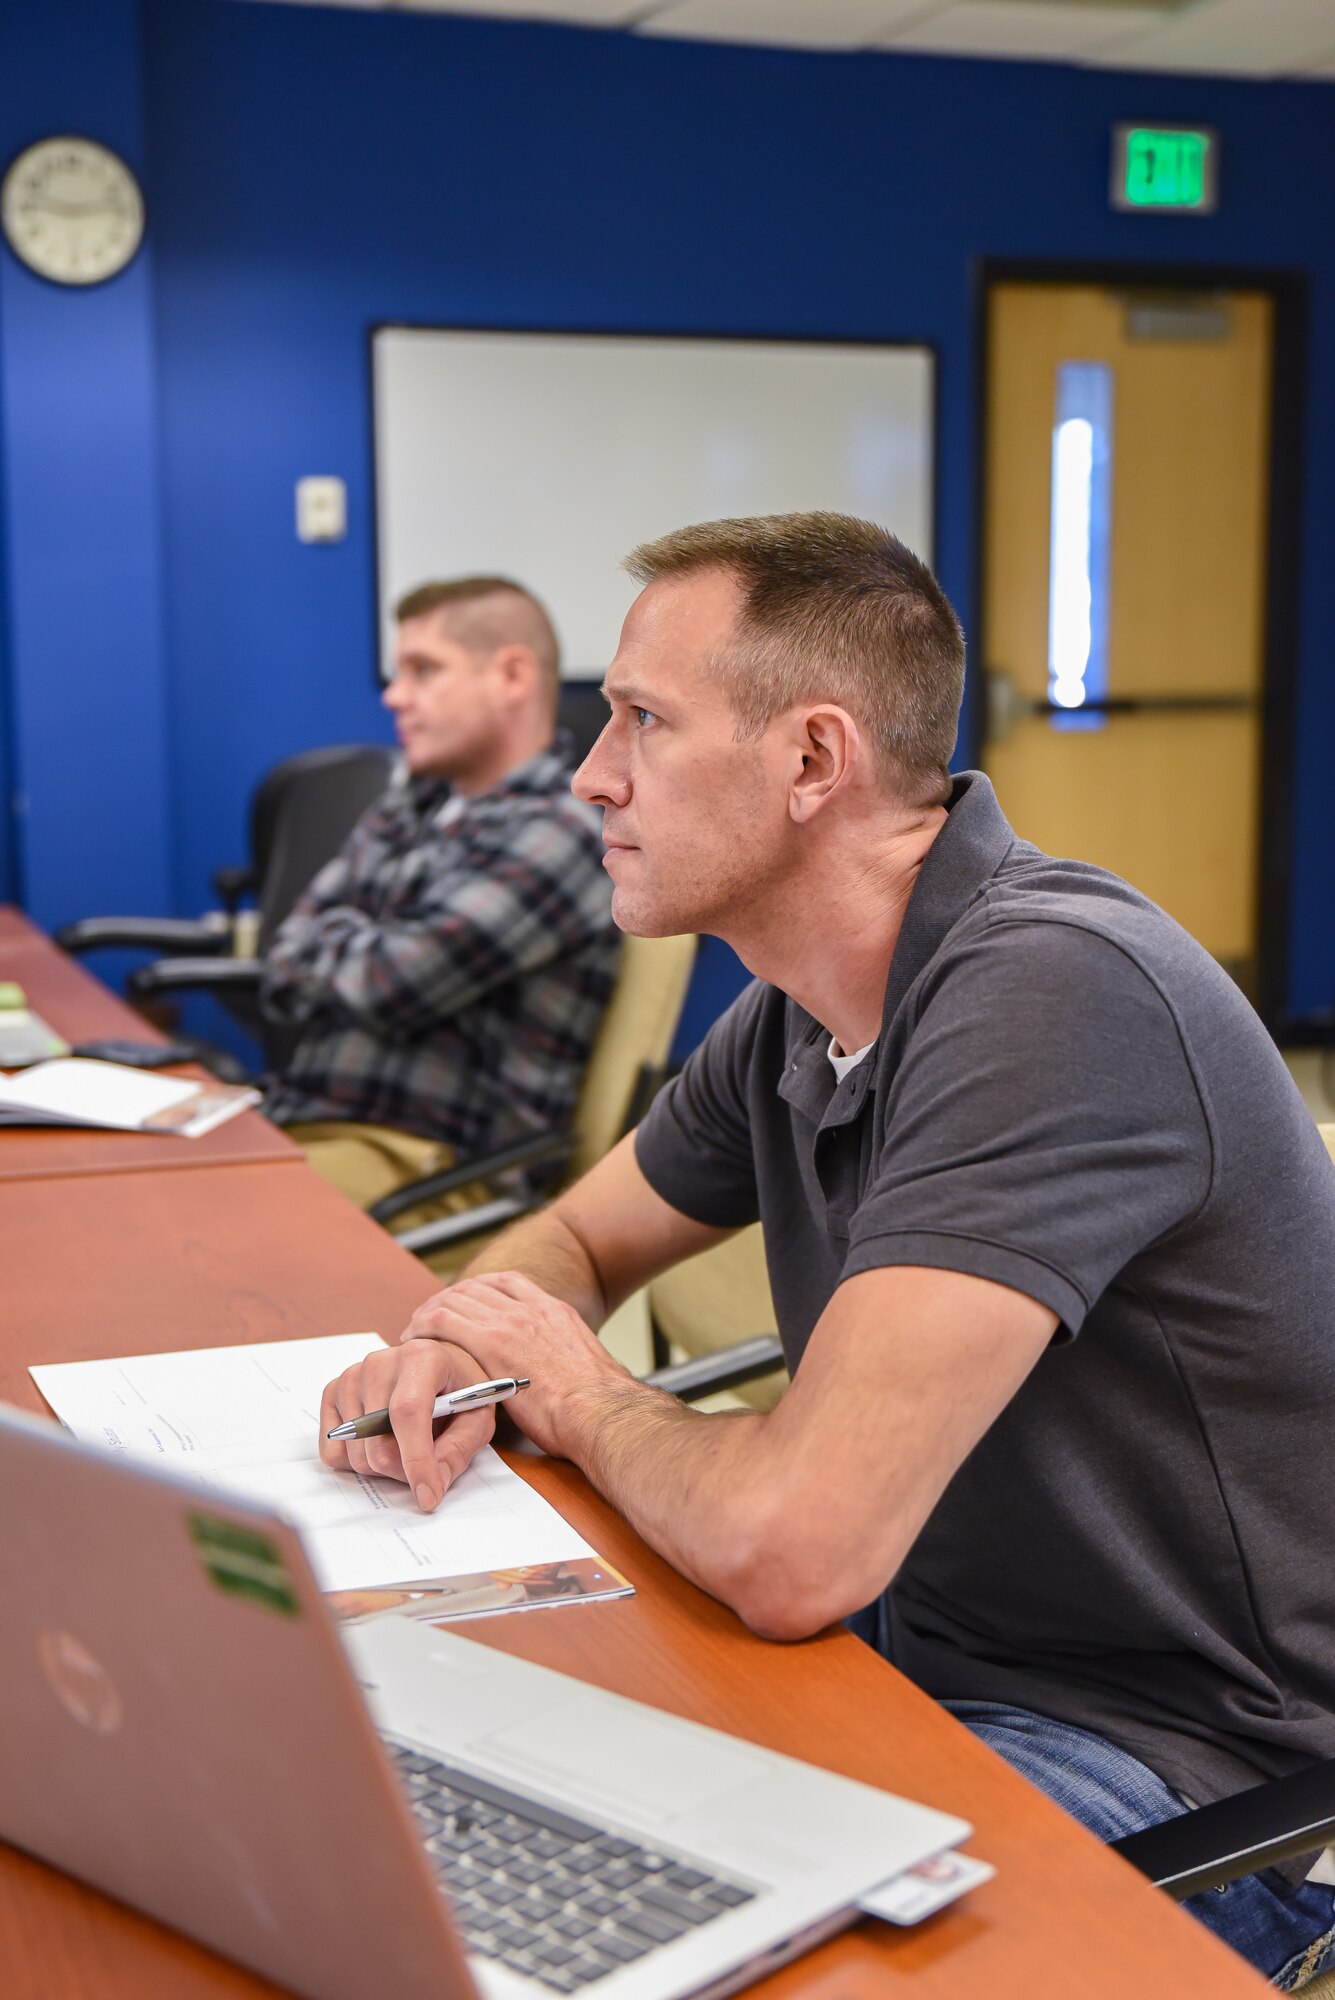 An U.S. Air Force member sits in a classroom and participates in leadership training.